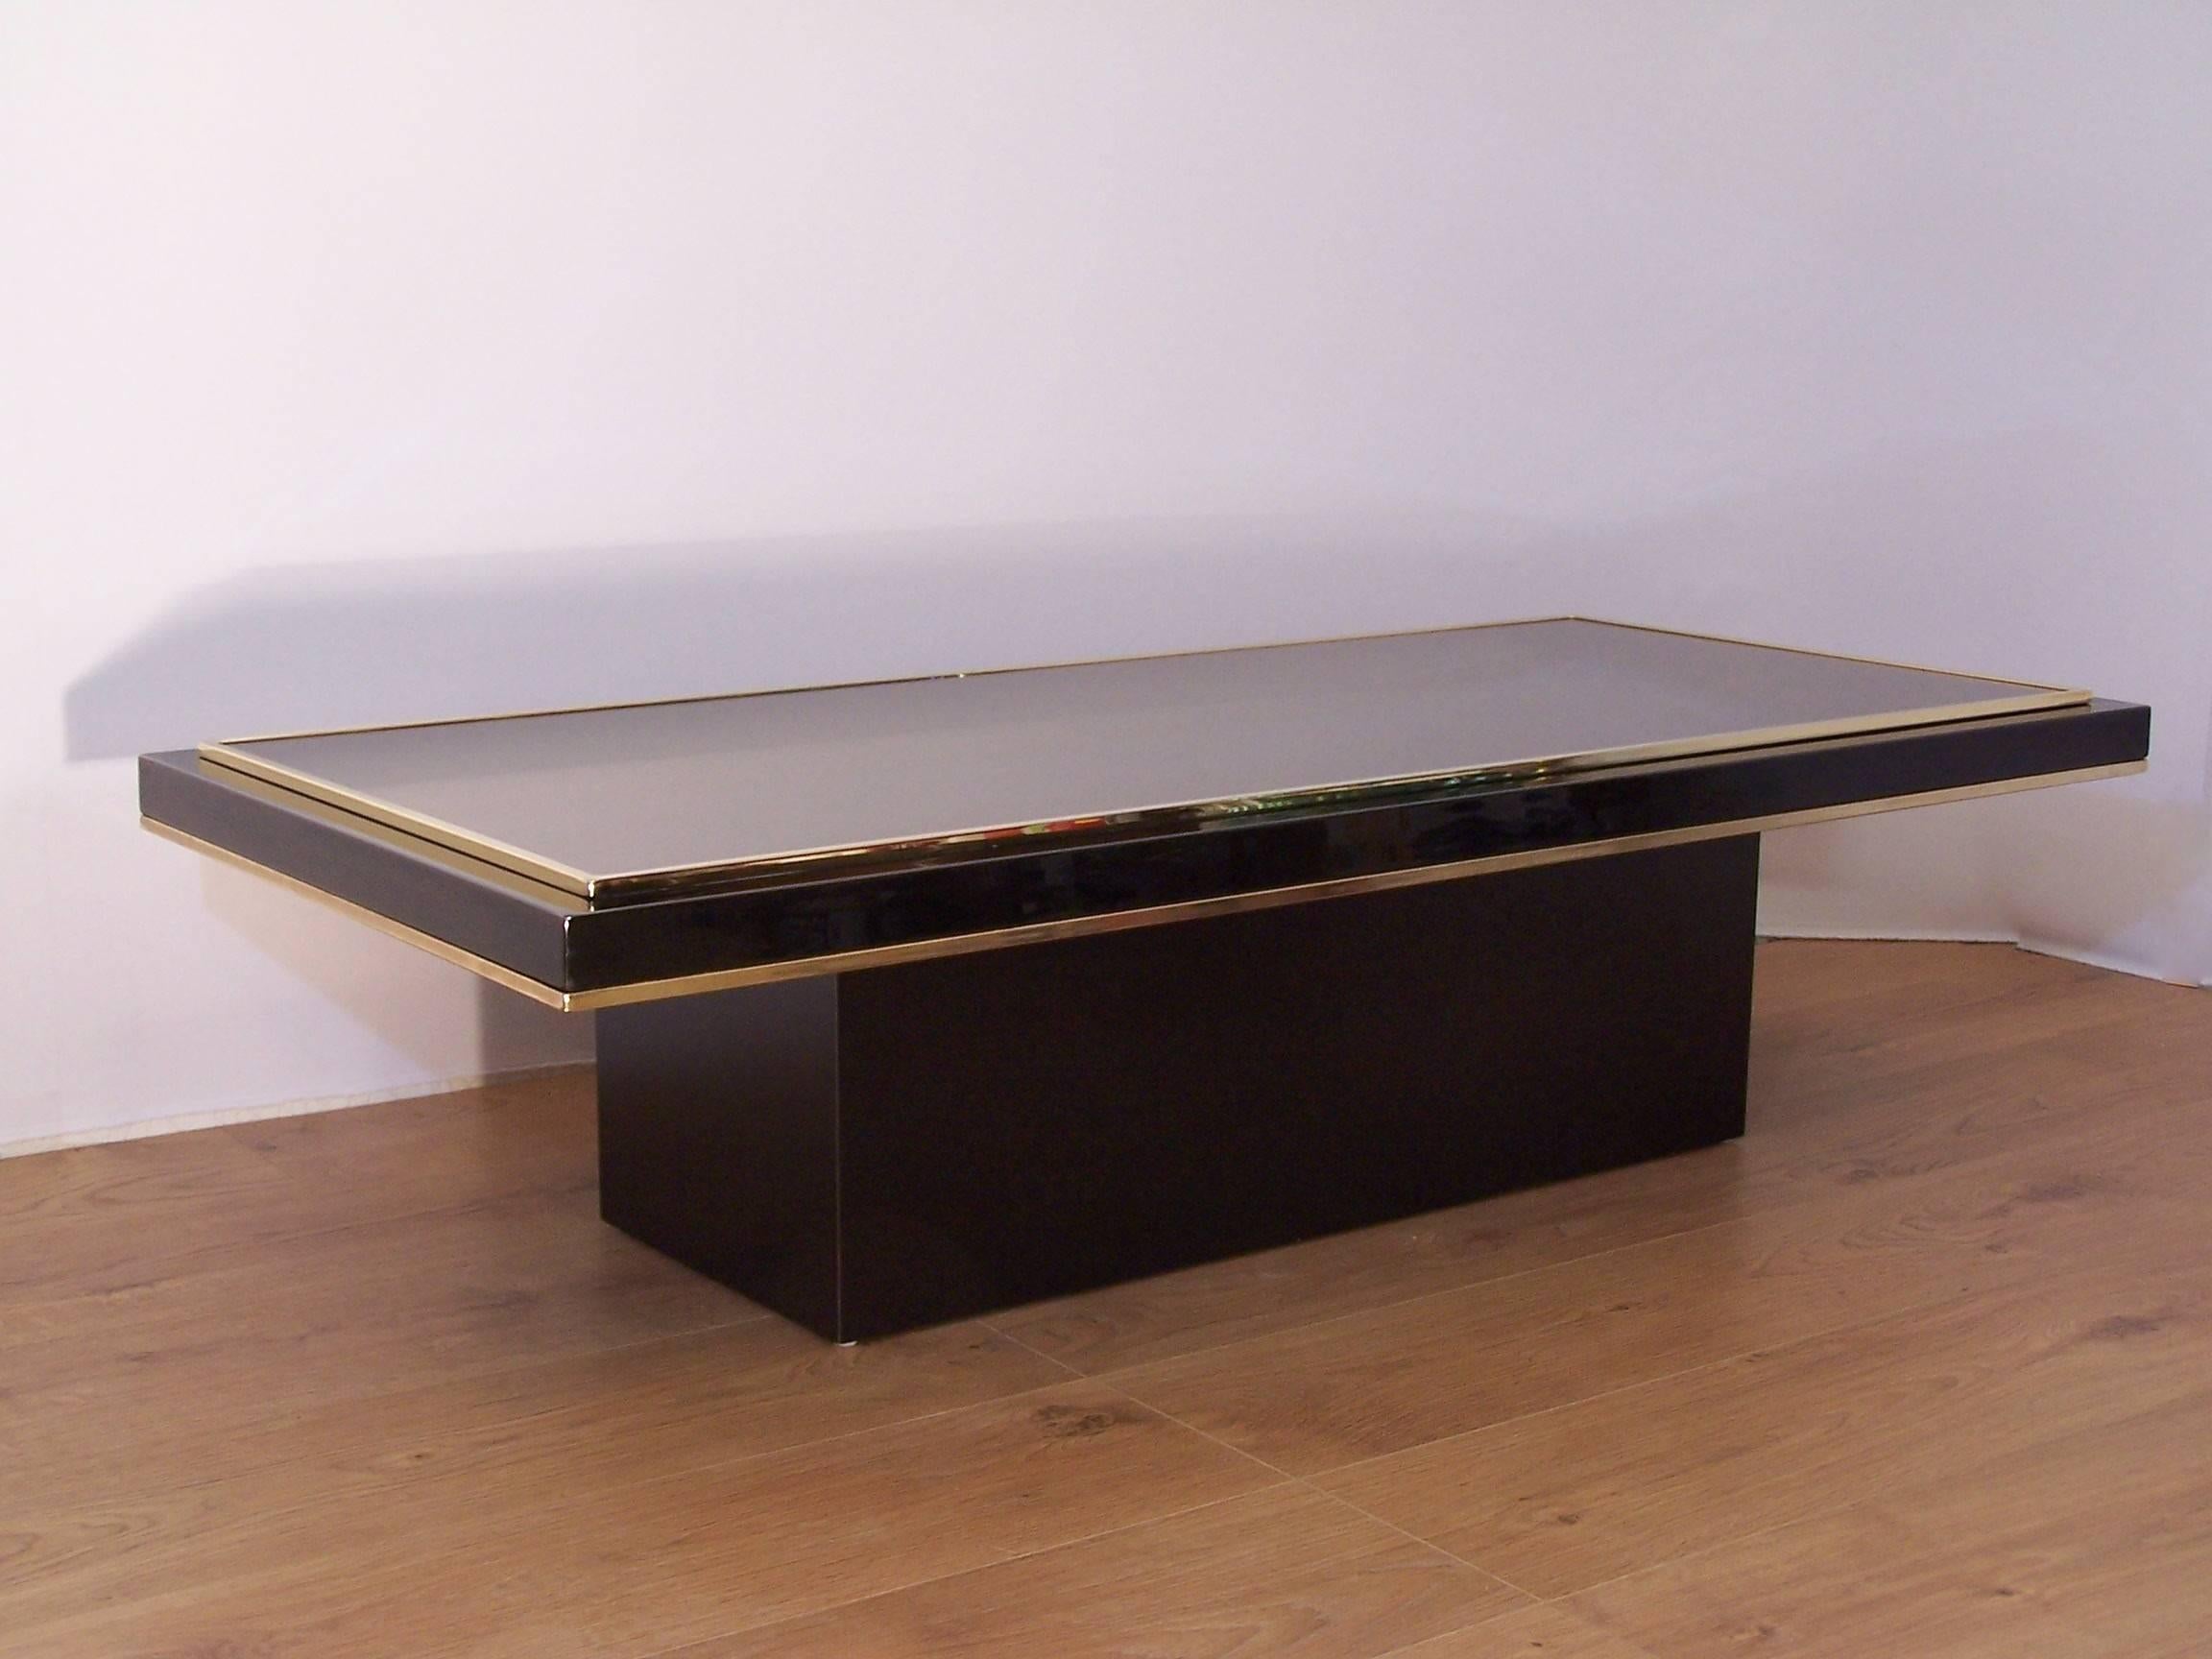 Sumptuous and glossy rectangular coffee table, vintage Dutch design by Roger Vanhevel; black lacquered metal, mirror effect bronze tray and gilded with fine gold 23-carat. Nice invoice, M2000 edition. An exceptional piece, charming and character in